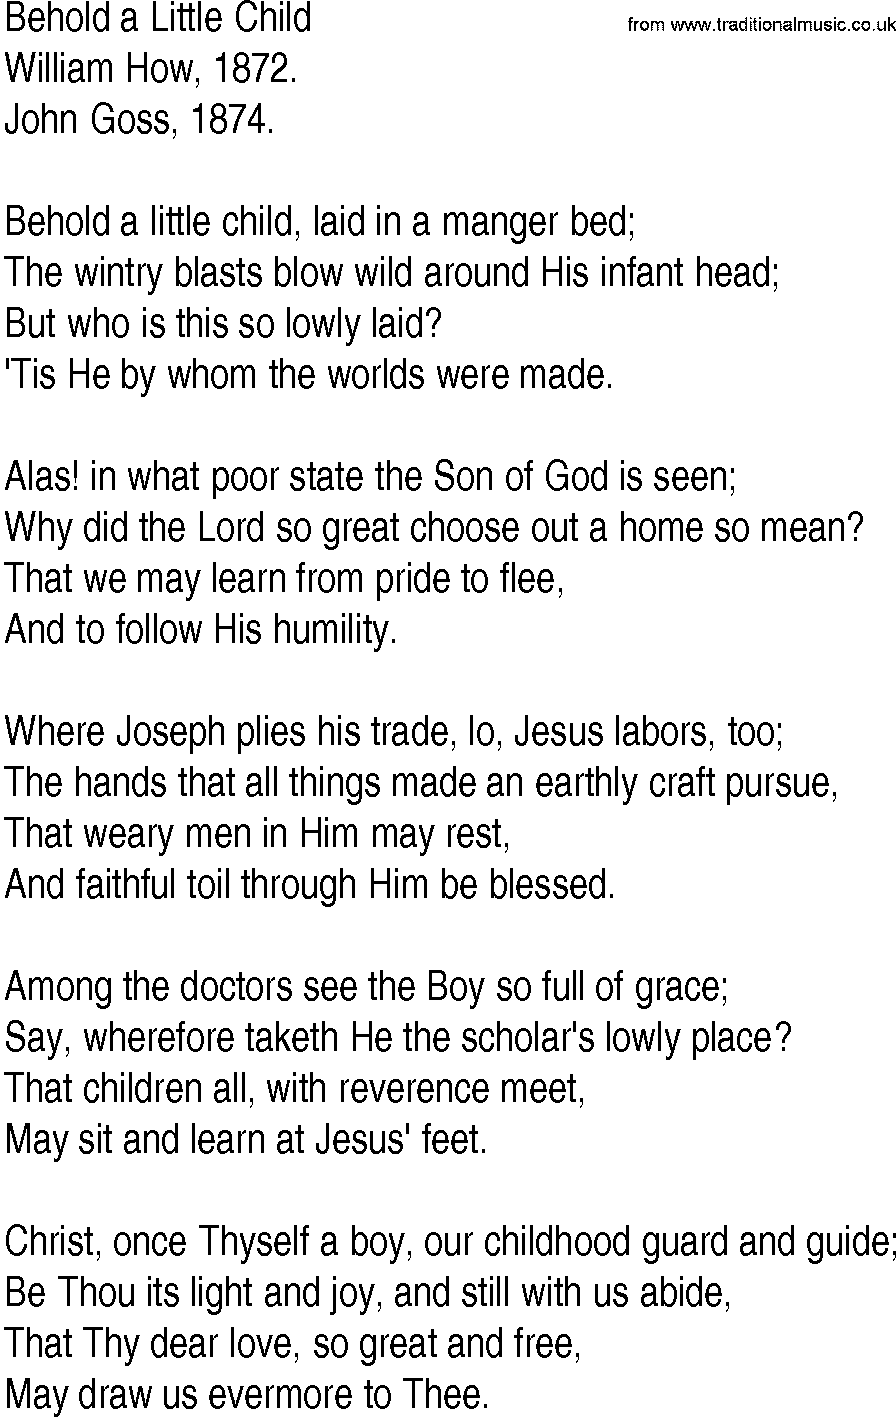 Hymn and Gospel Song: Behold a Little Child by William How lyrics